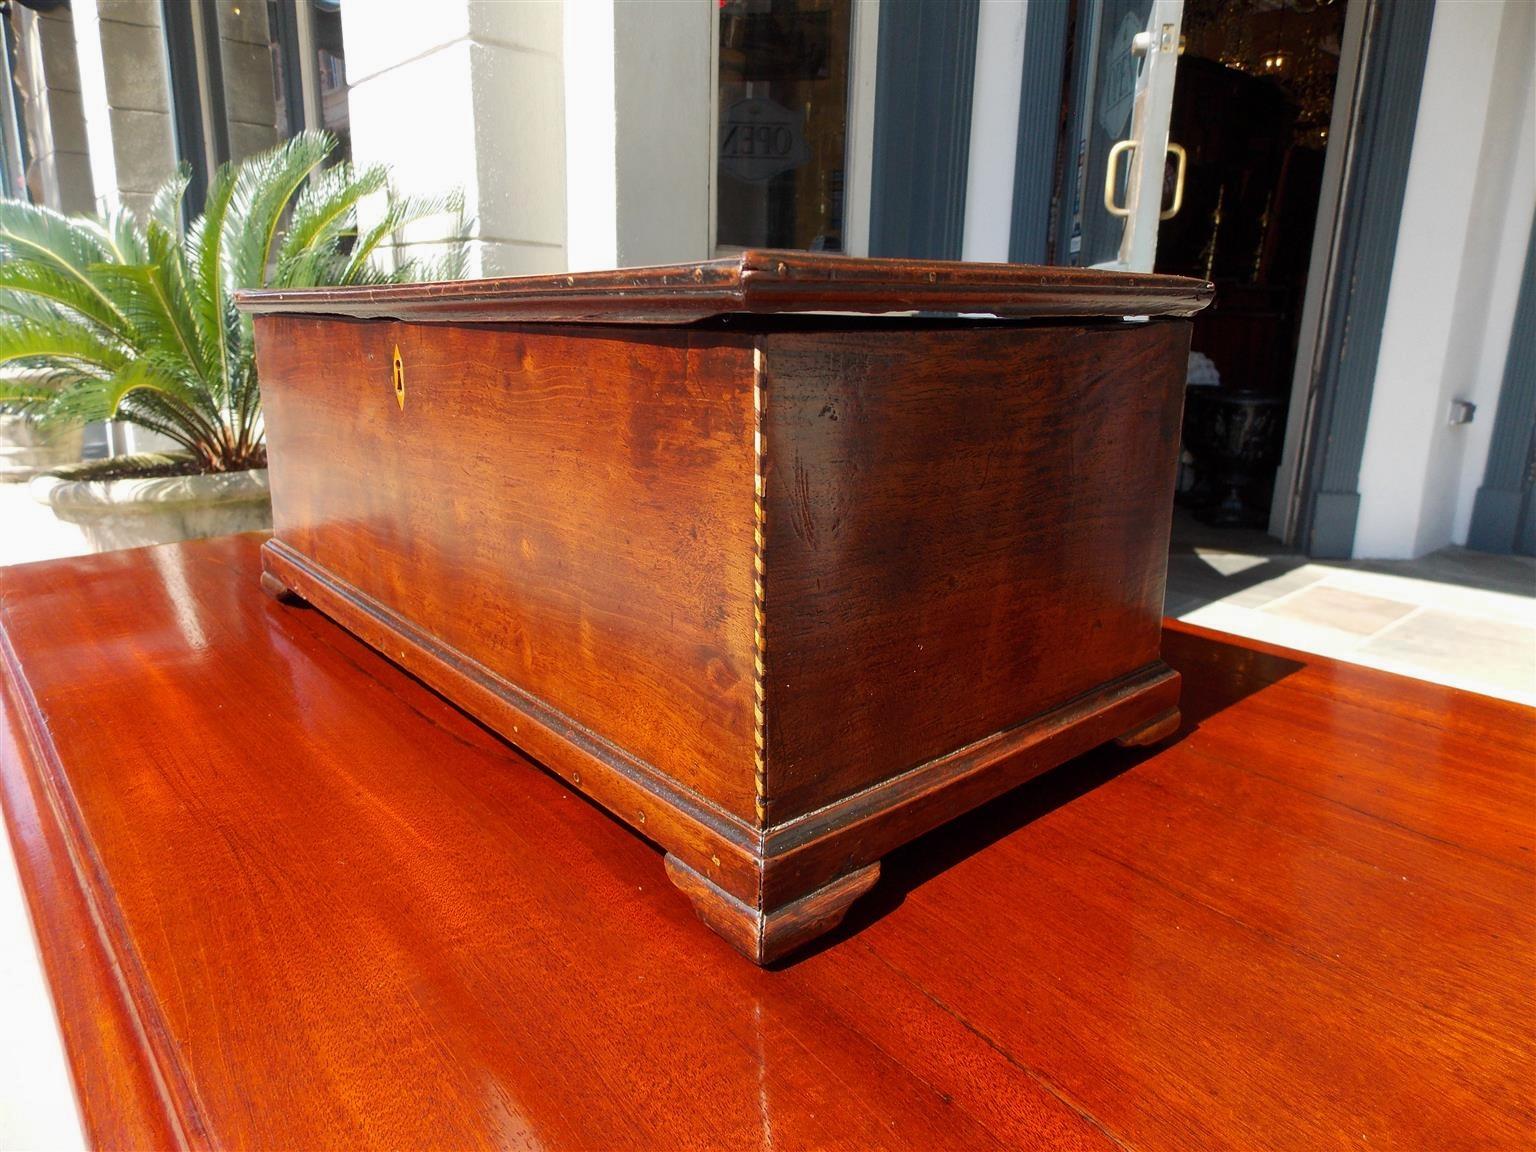 American Walnut Satinwood Inlaid Valuables Box with Original Feet, Circa 1780 For Sale 4